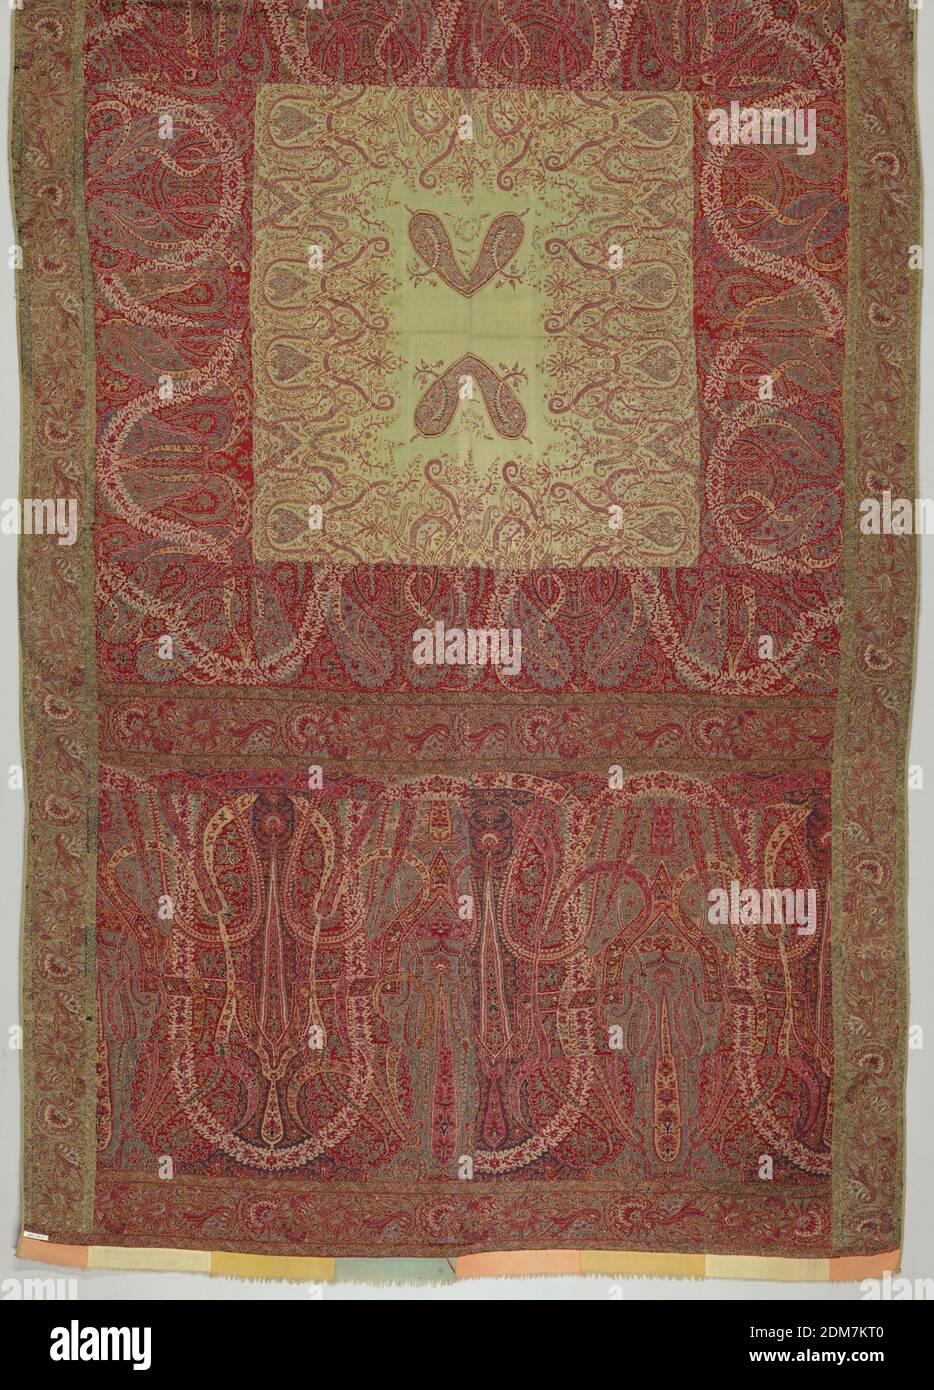 Shawl, Medium: wool Technique: twill tapestry weave, pieced Label: wool twill tapestry, pieced together, Shawl with large-scale leaves. Center in light green with repeated almond shapes in pairs surrounded by floral elements. Center enframed by four outer borders of varying widths. Predominantly red and green., India for European market, 1830–1850, woven textiles, Shawl Stock Photo